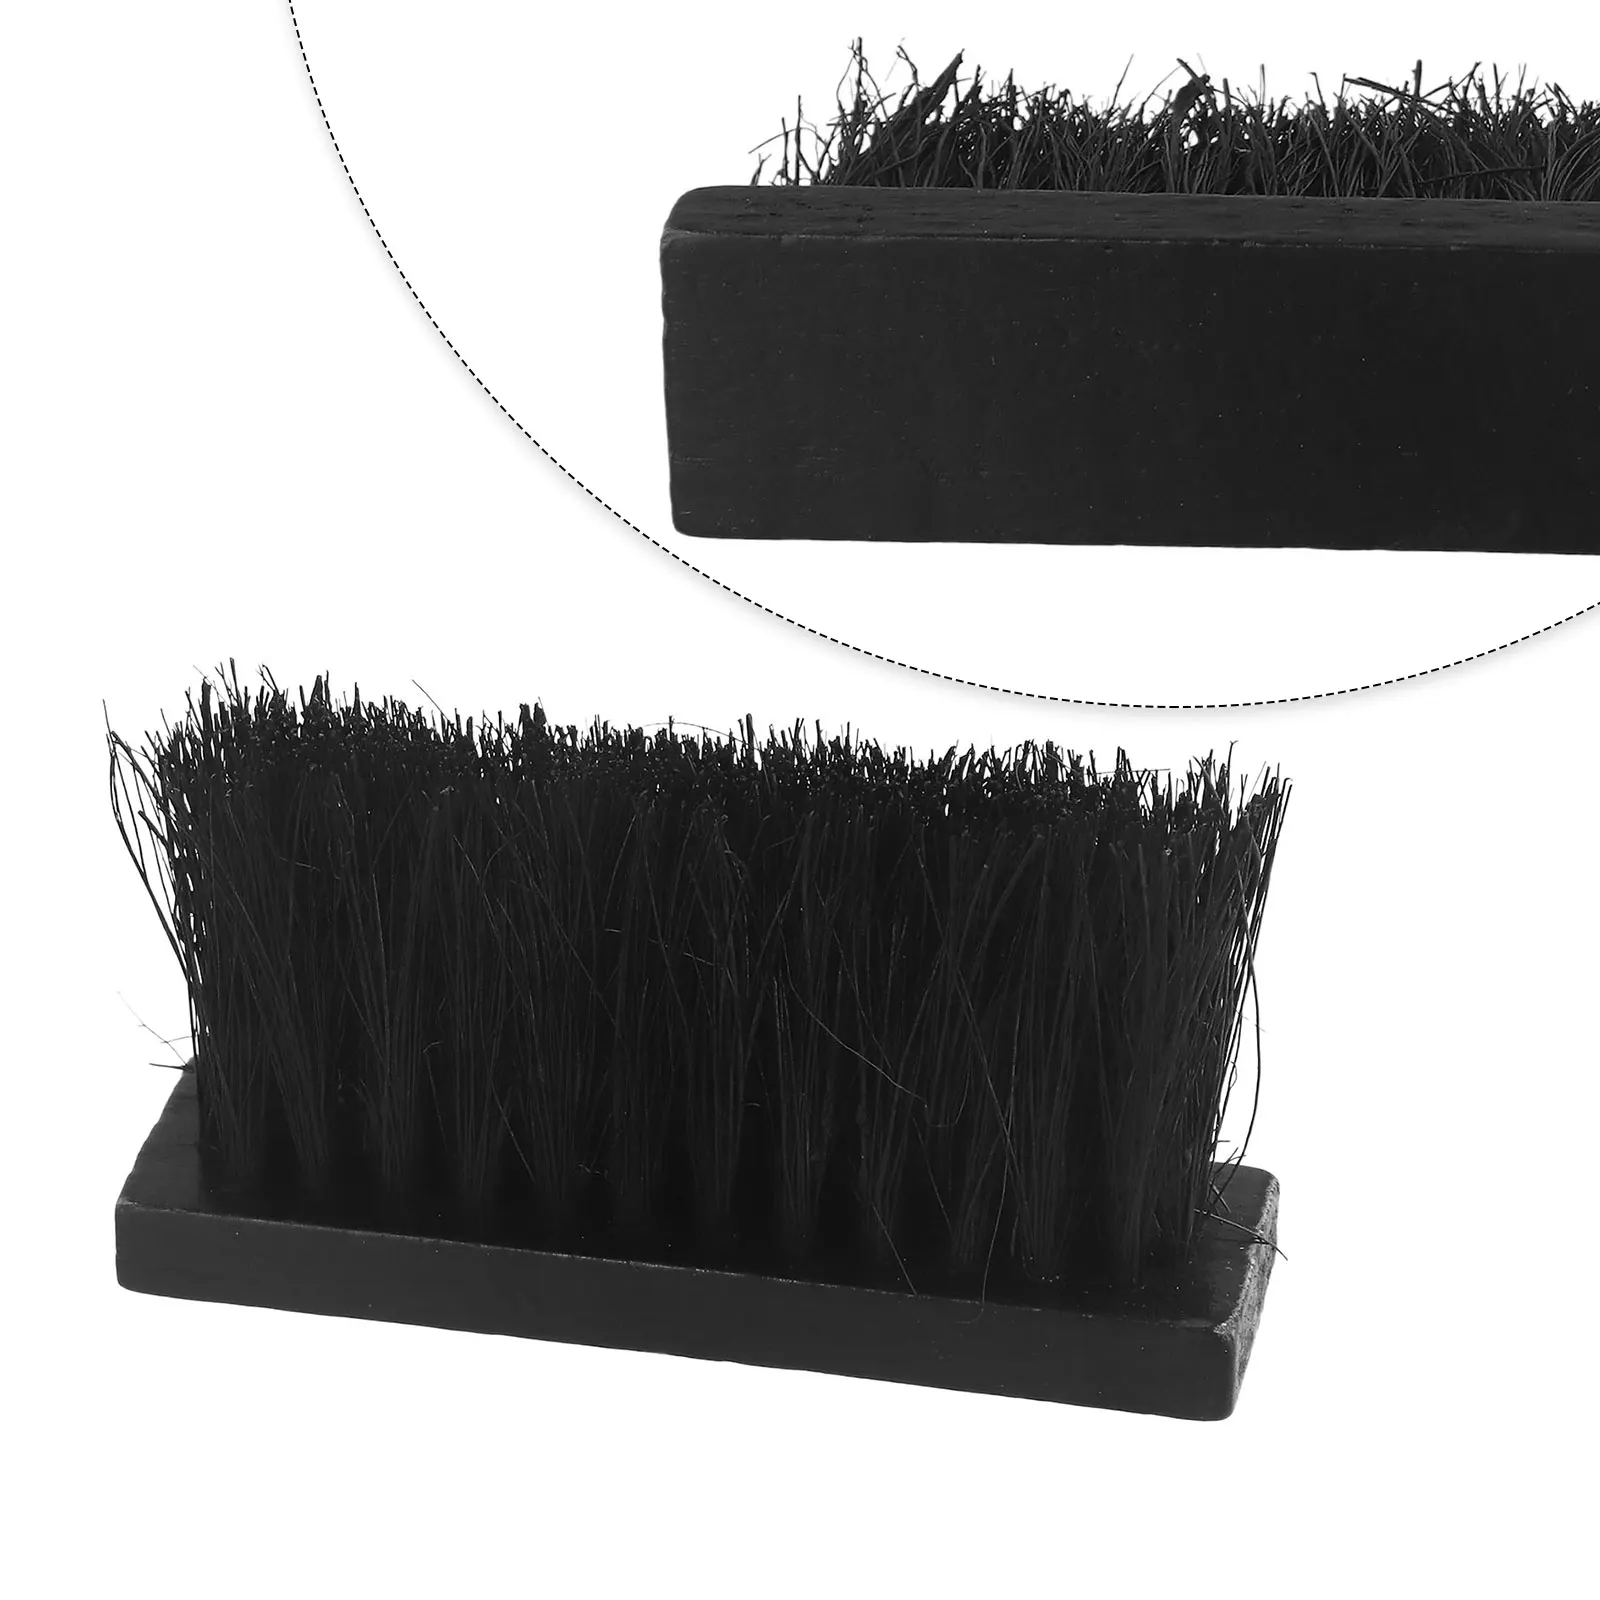 wooden handle round shape brush head fireplace fire hearth fireside brushes tool for fireplace maintenance wooden bristle brush Cleaning Brushes Fireplace Brush 13.5x3.5x1.3cm Black Brush Head Fireplace Fireside Refill Cleaning Square Home Brand New